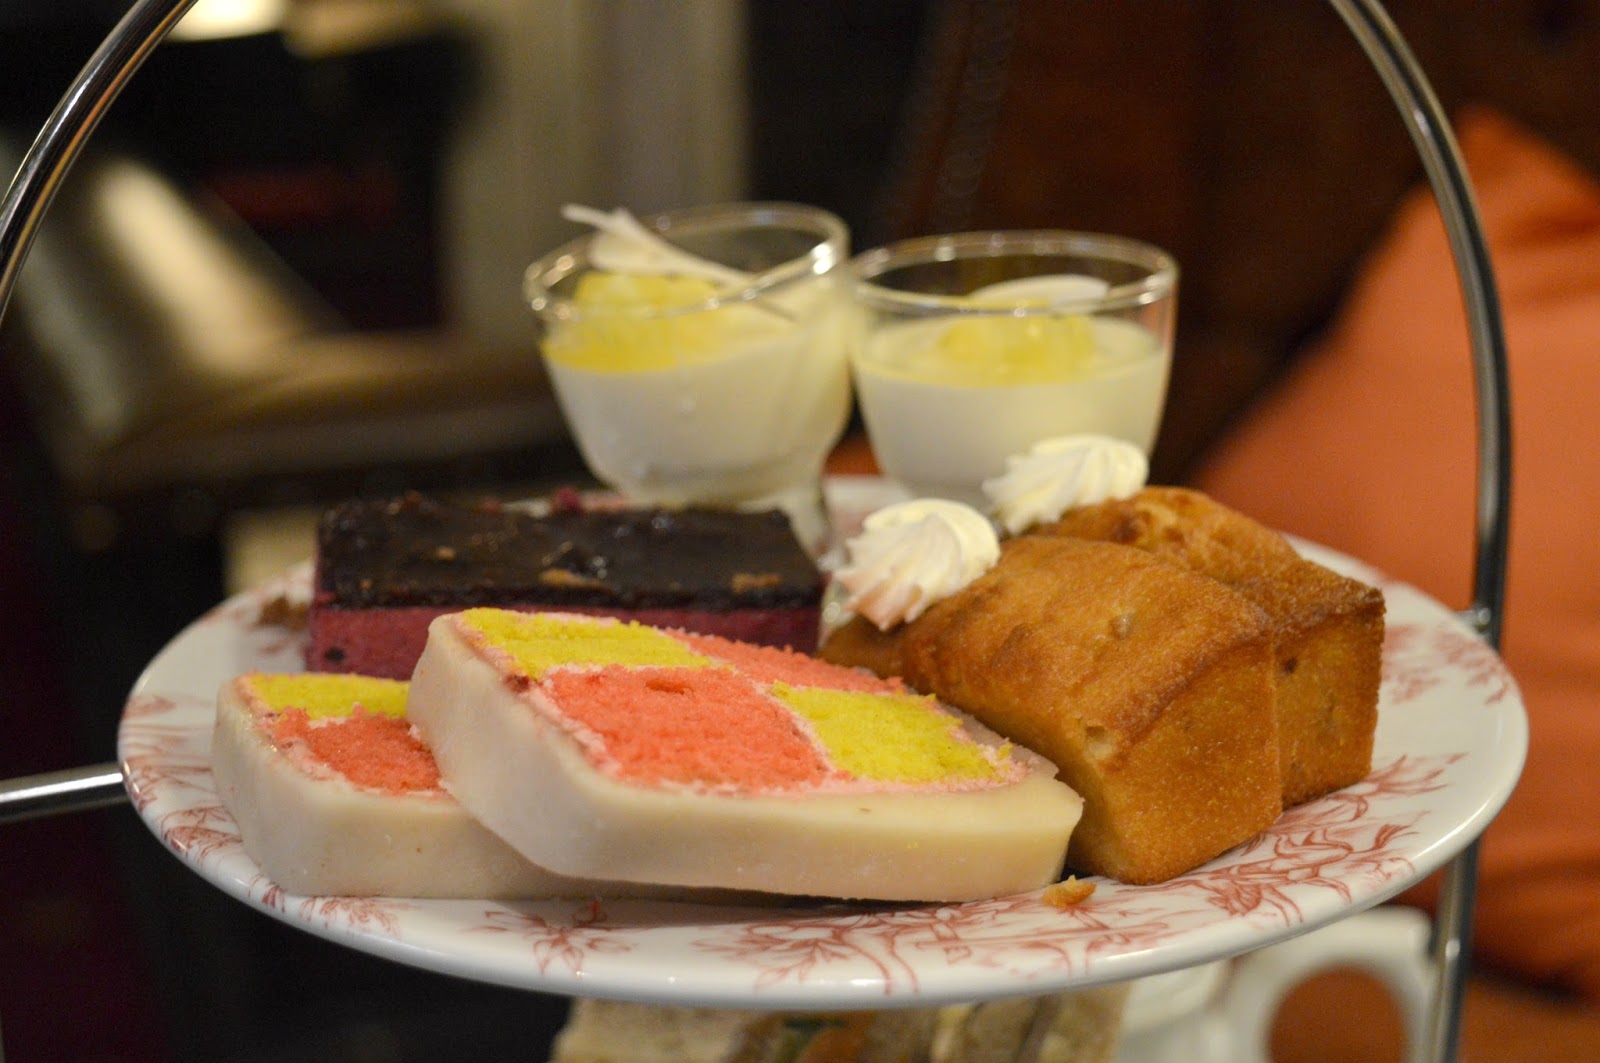 Afternoon Tea at Lumley Castle, County Durham